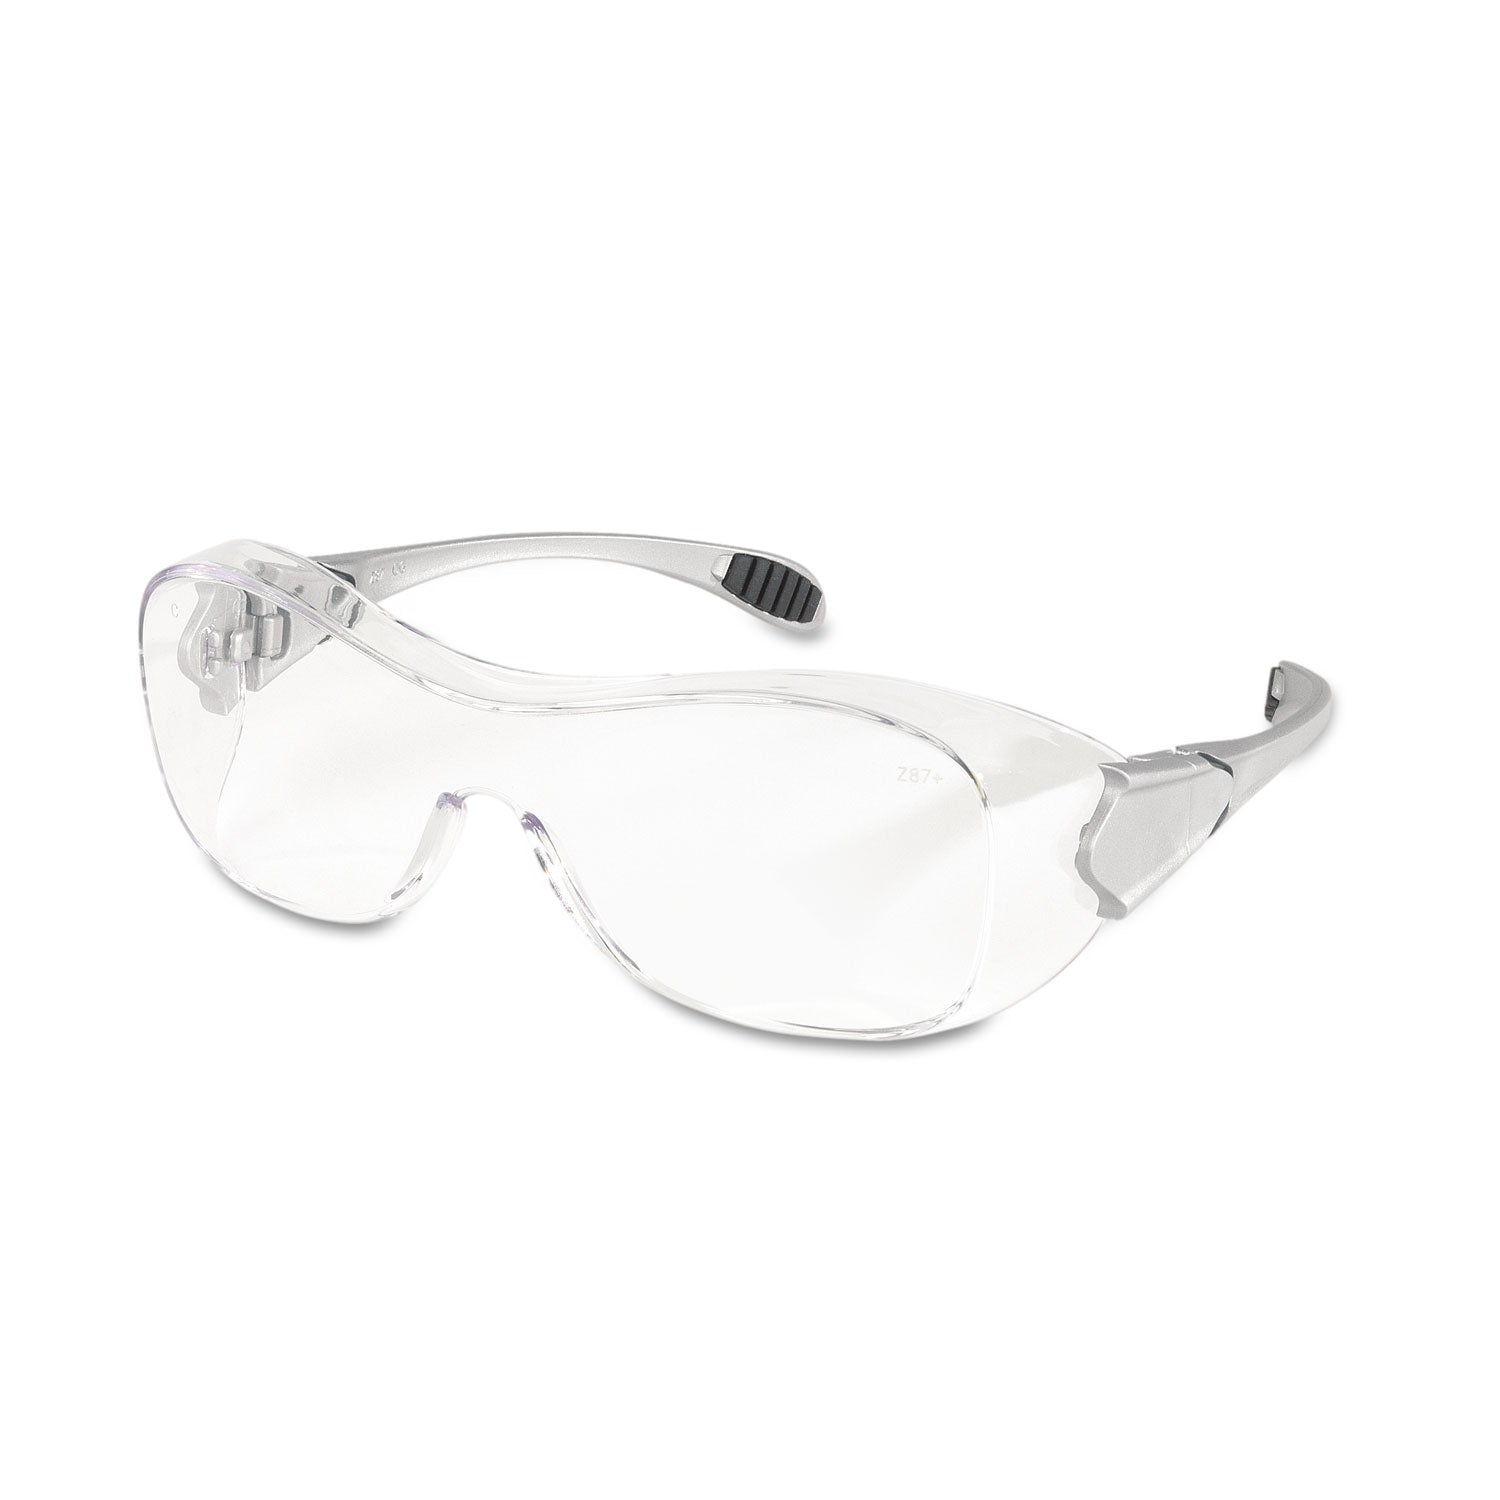 Law Over the Glasses Safety Glasses, Clear Anti-Fog Lens - 